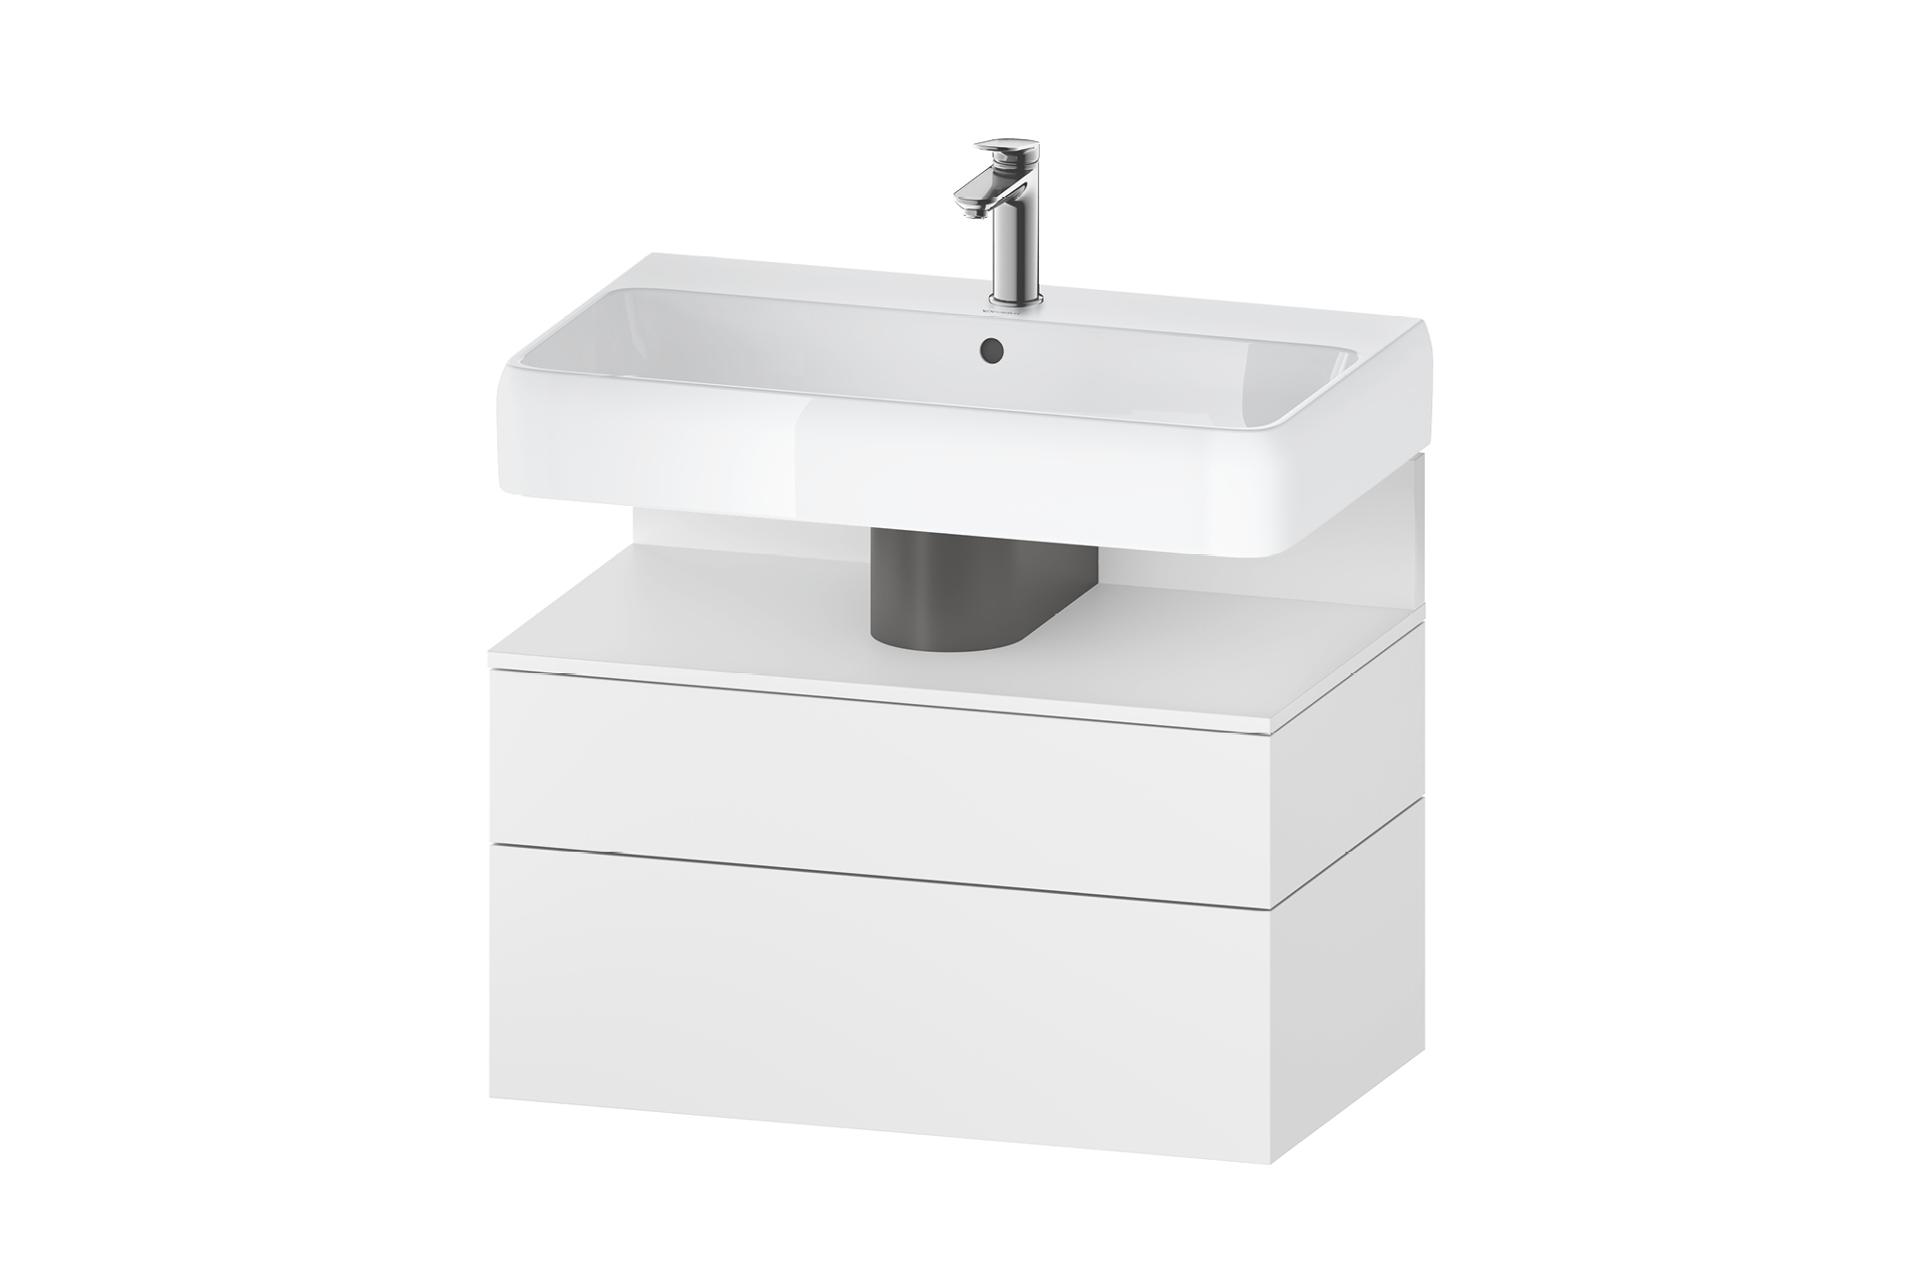 Vanity unit with two drawers in combination with a furniture washbasin
